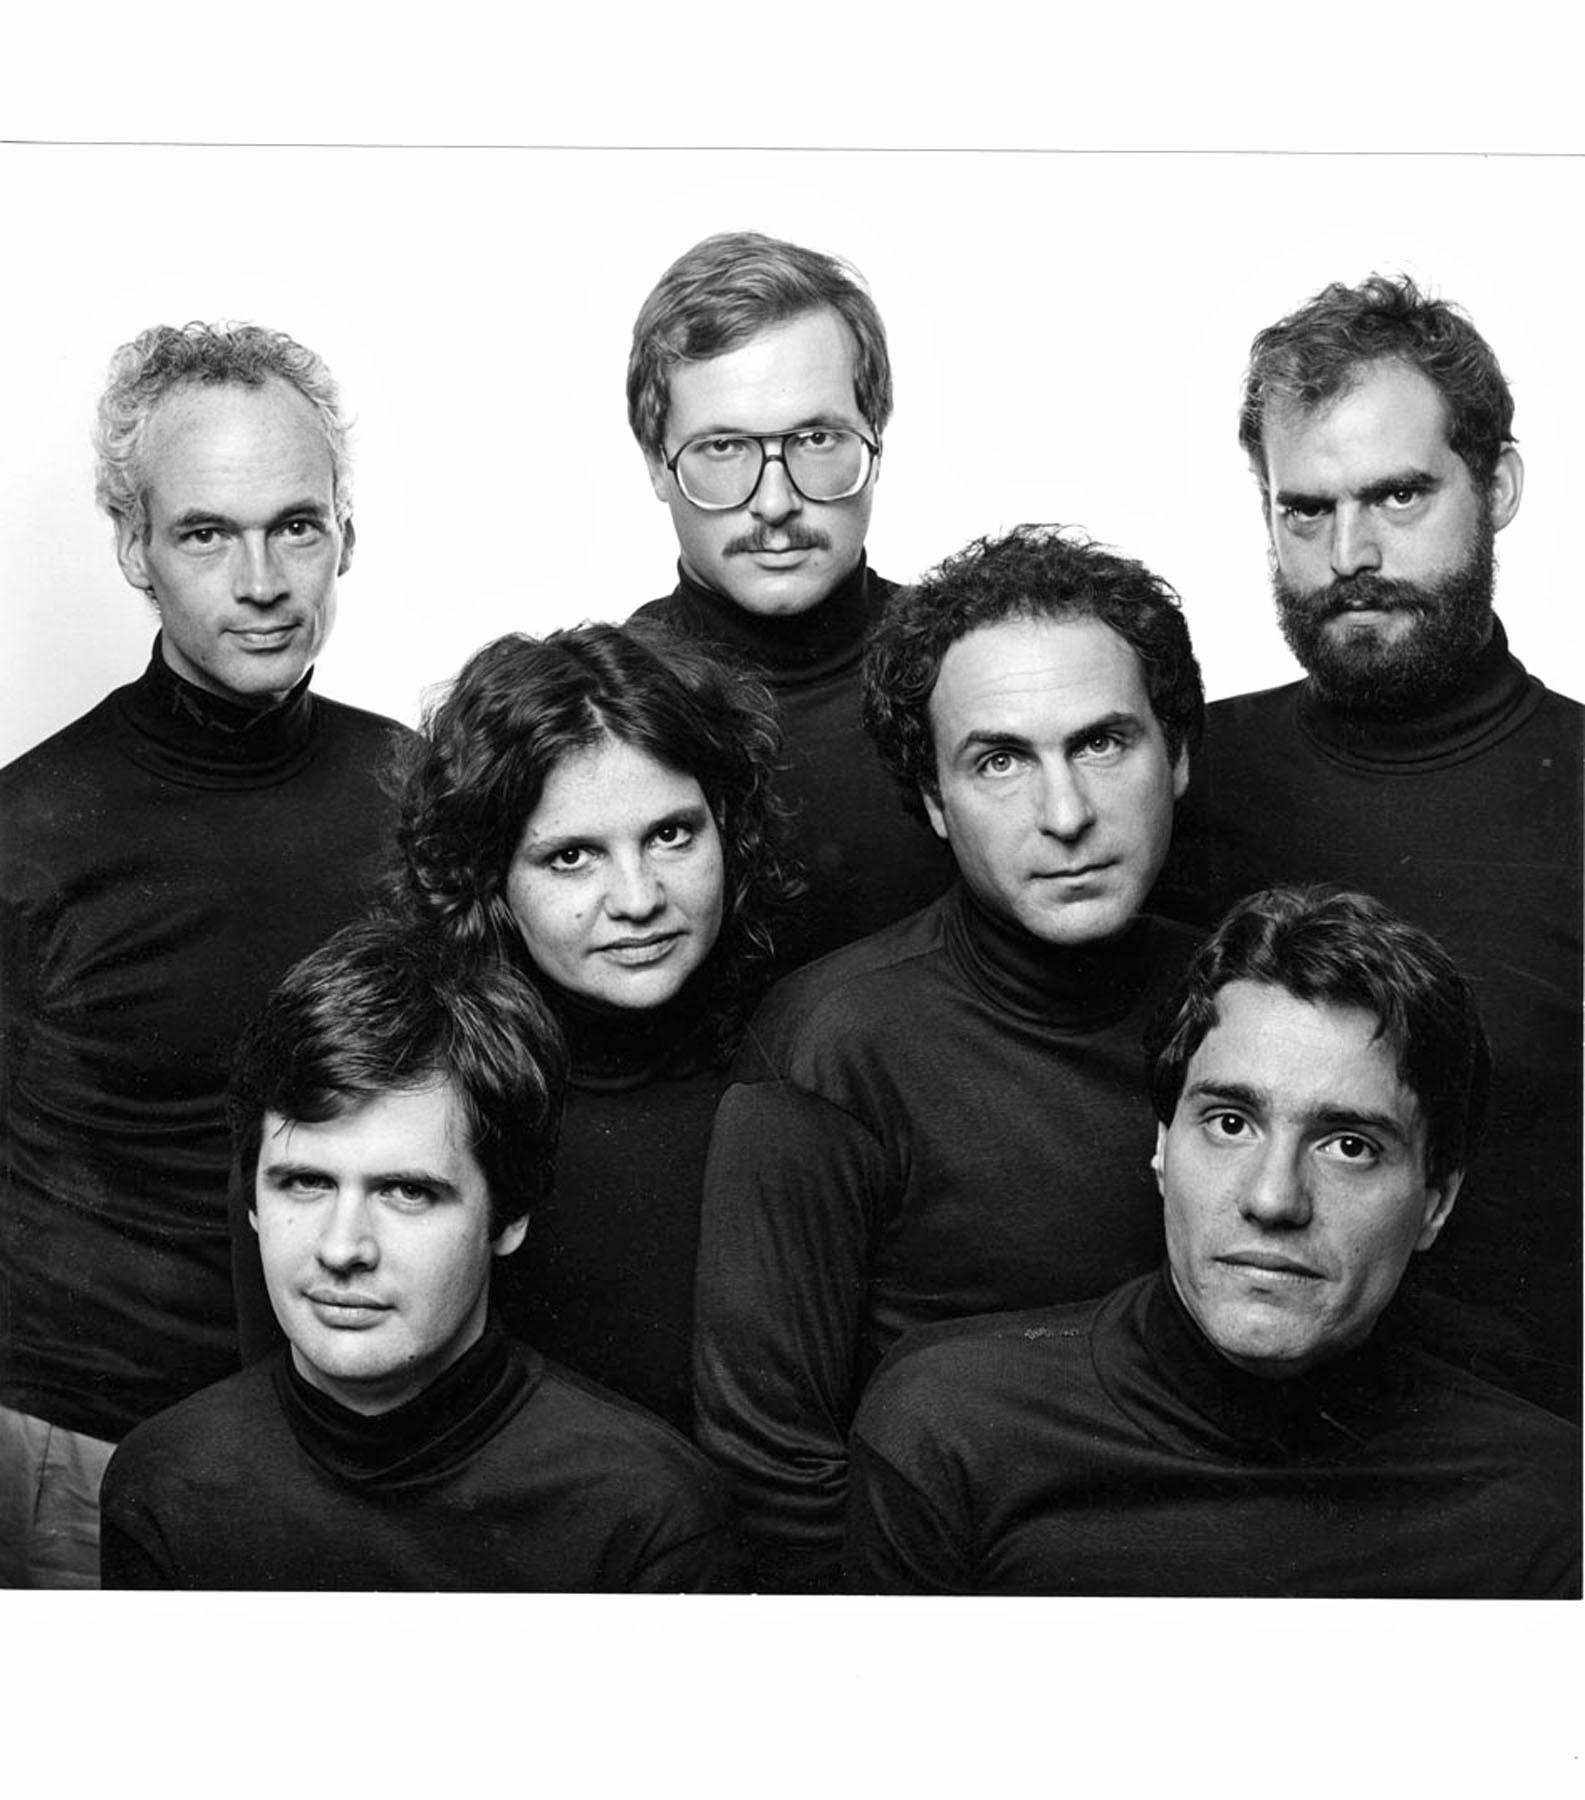 Jack Mitchell Black and White Photograph -  Playwrights Reynolds, Durang, Lapine, Tally, Wasserstein, Finn, and Inaurato